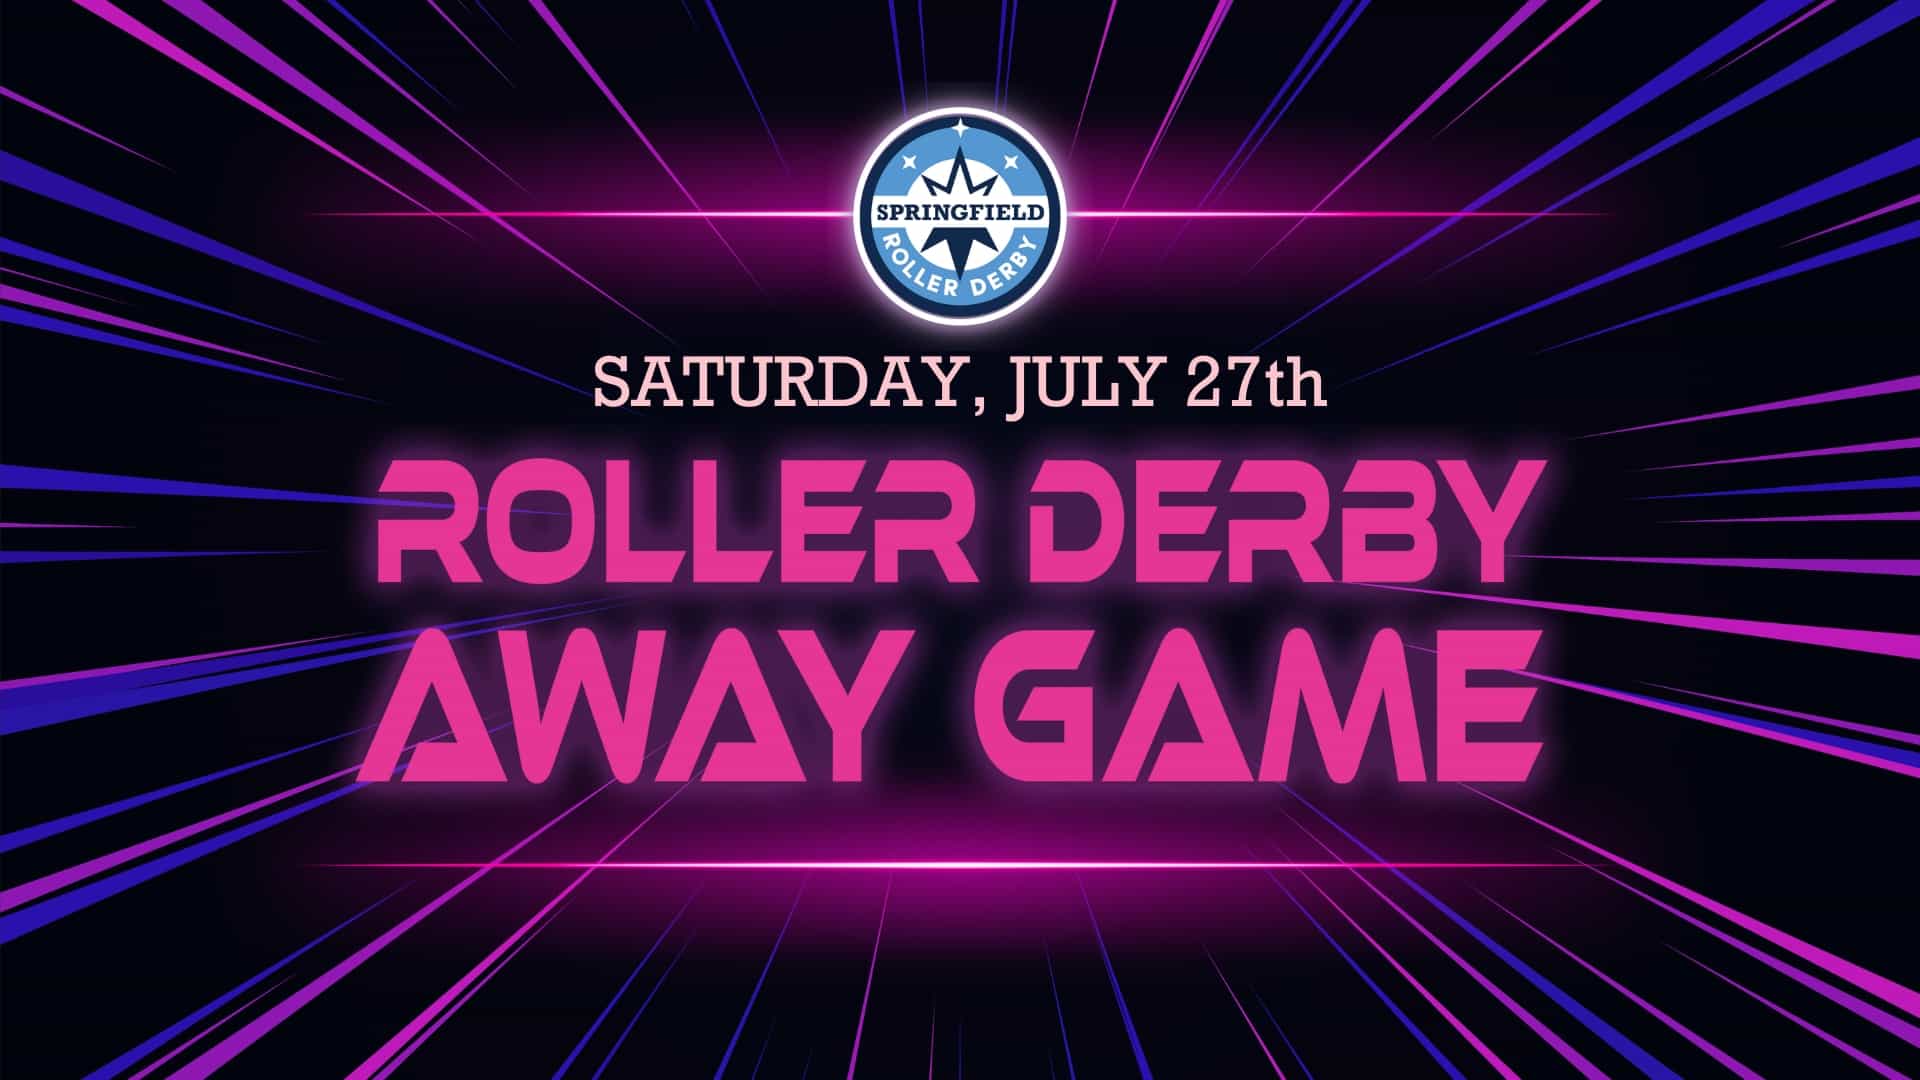 Graphic with image of lasers with black background, images of SRD logo. Text reads Saturday, July 27th Roller Derby Away Game.